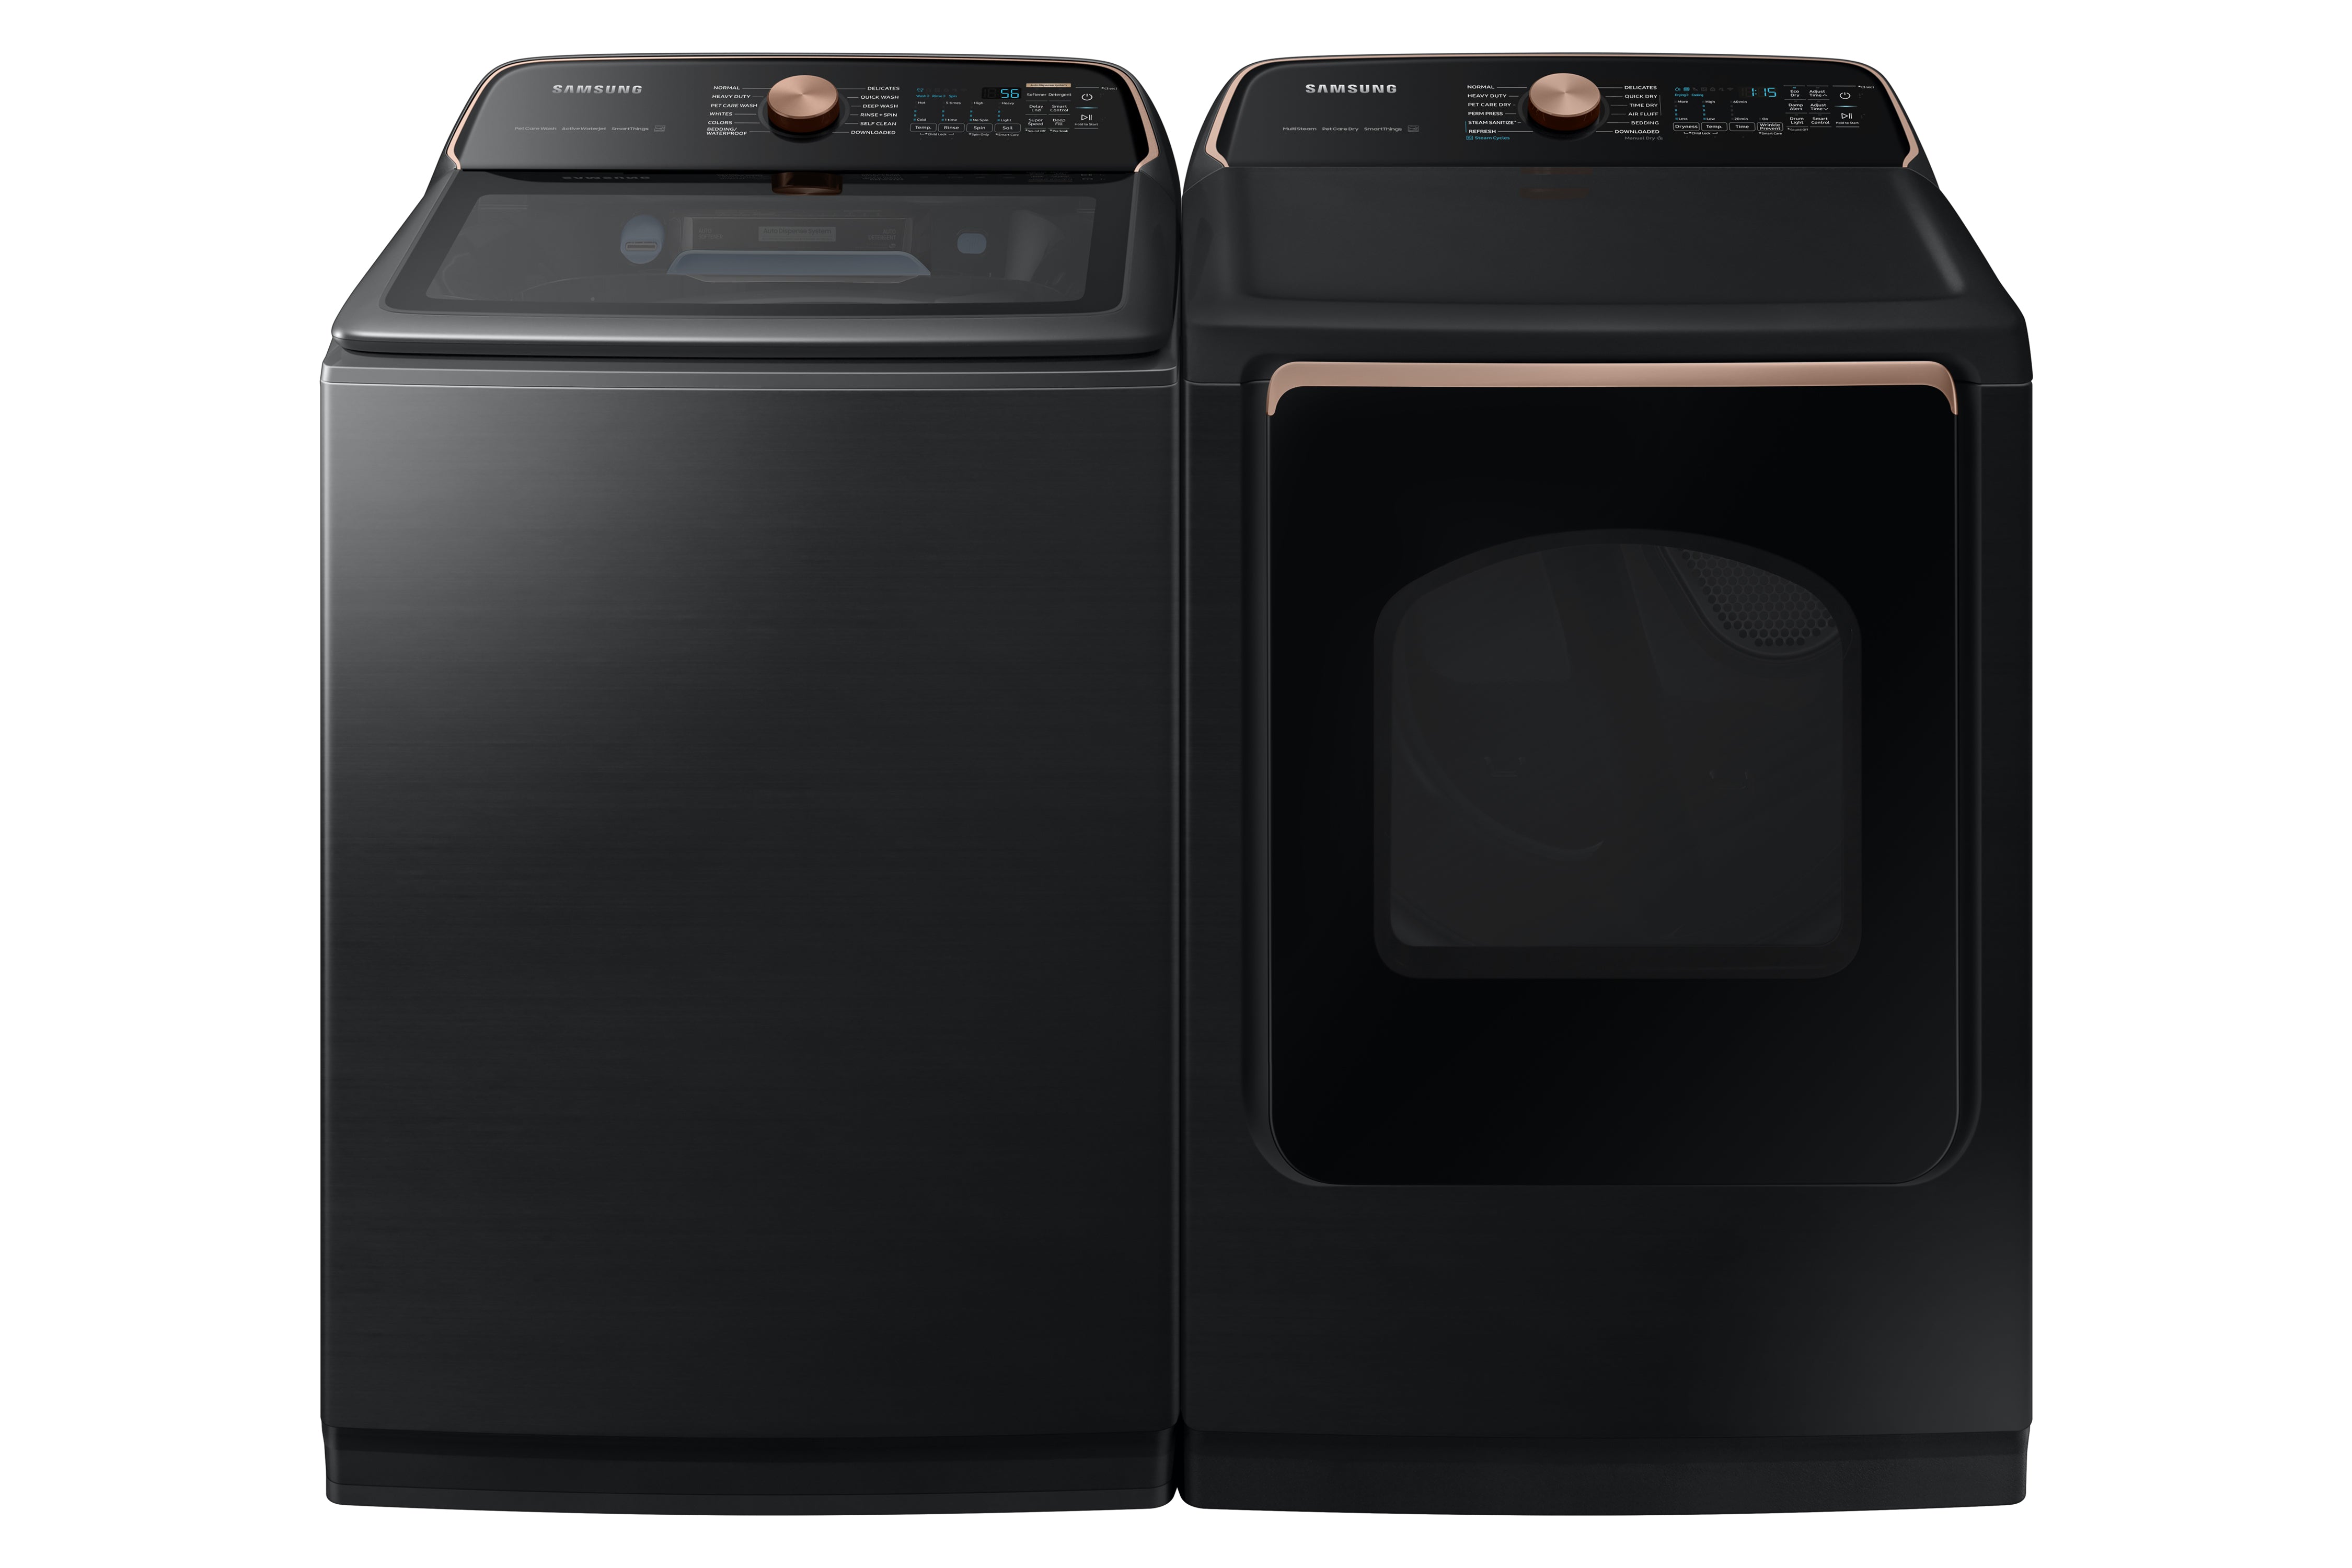 Samsung - 6.2 cu. Ft  Top Load Washer in Black Stainless - WA54CG7550AVA4